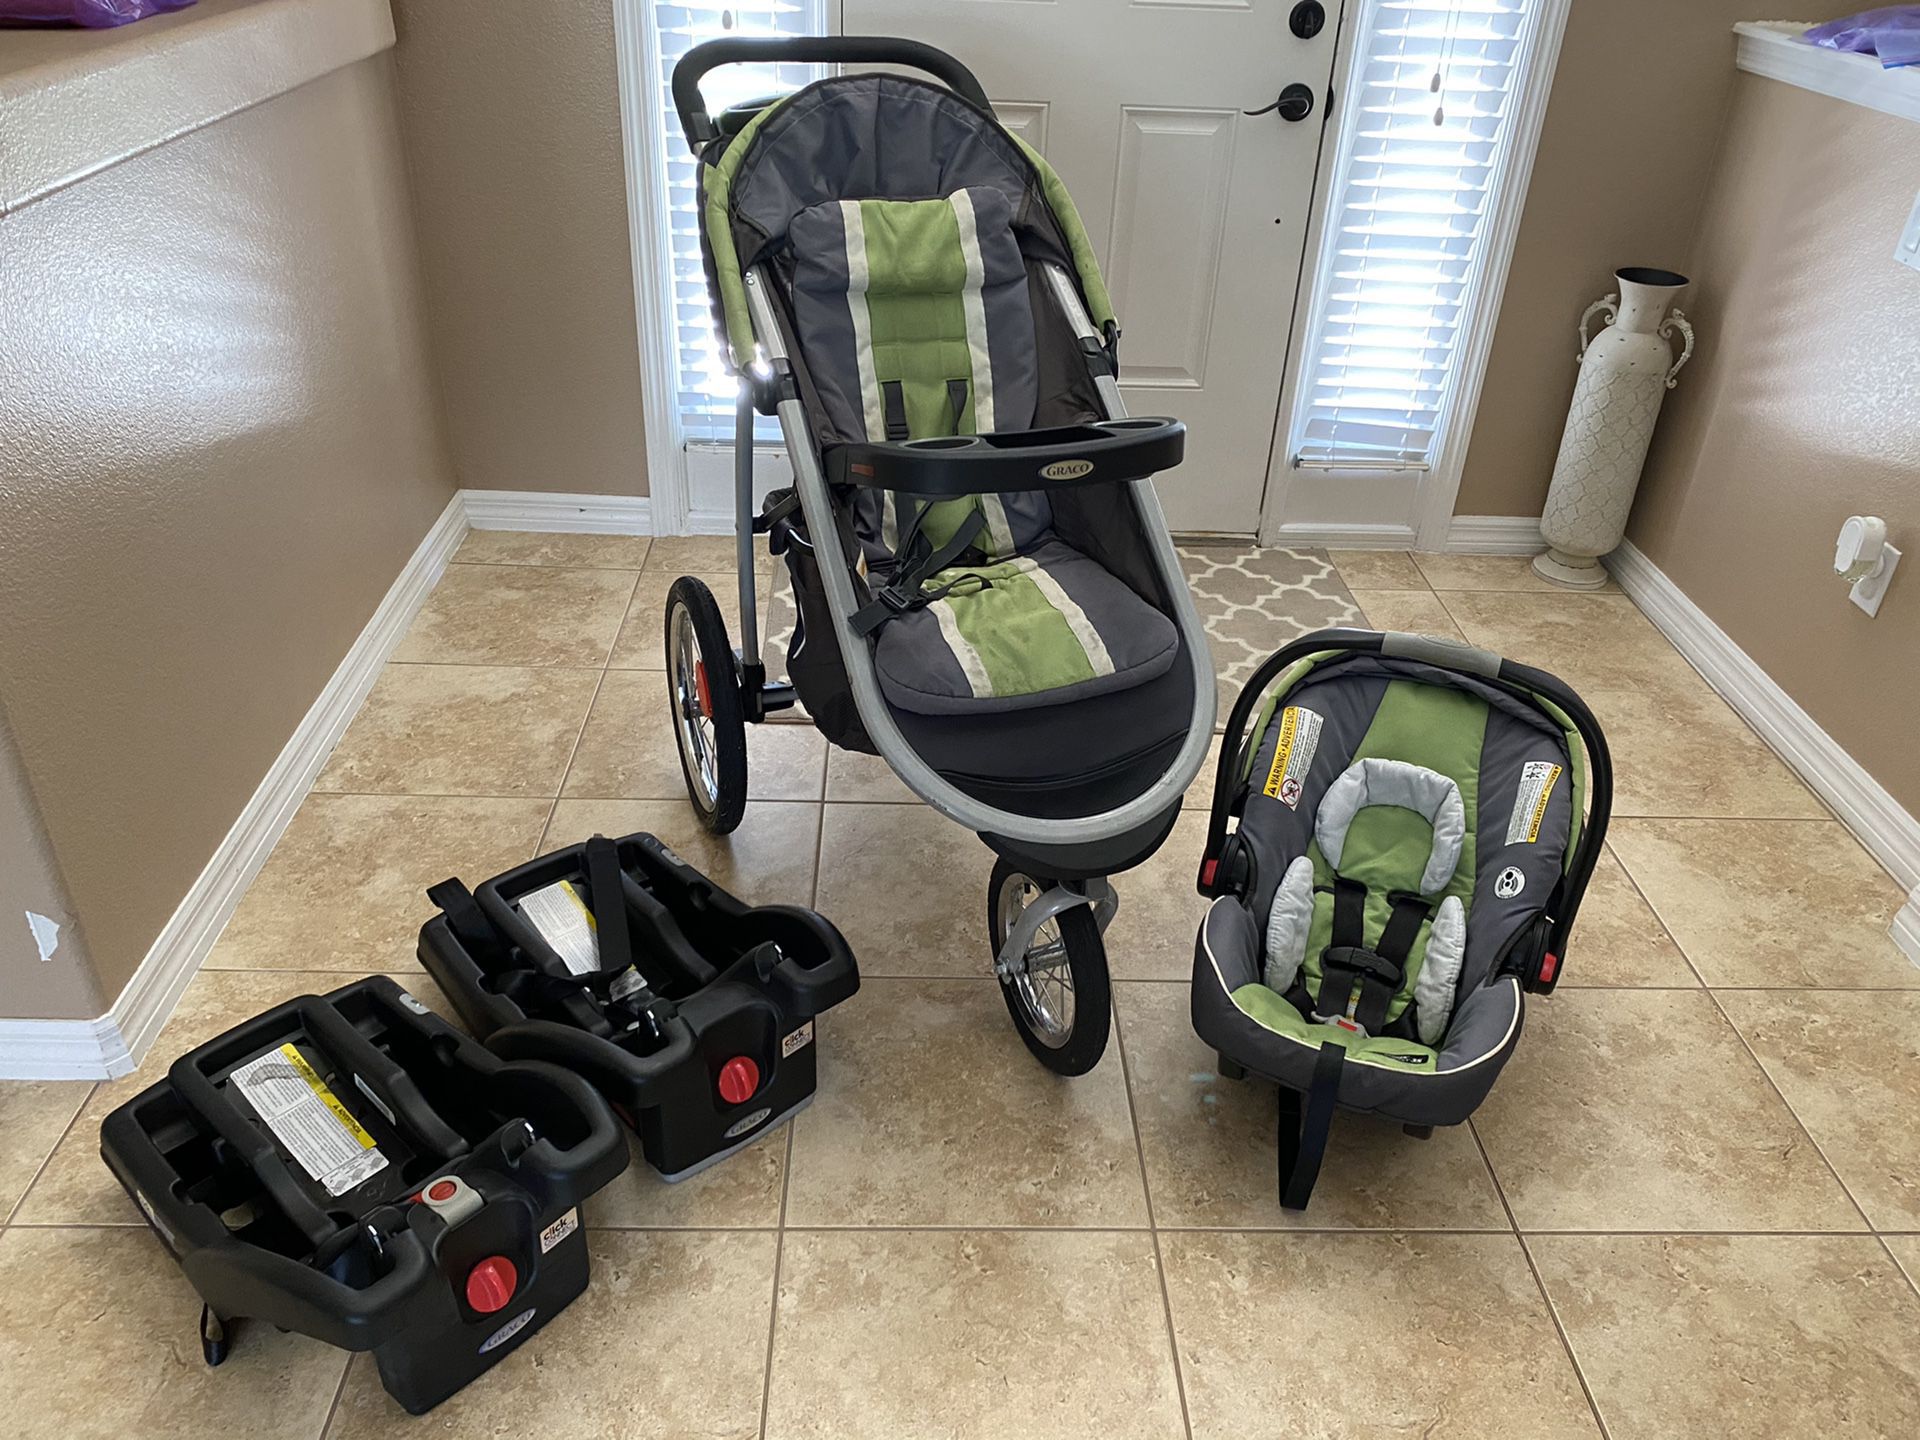 Graco Click Connect Travel System - car seat expires 9/2021 includes car seat, jogging stroller and ONE car seat bases